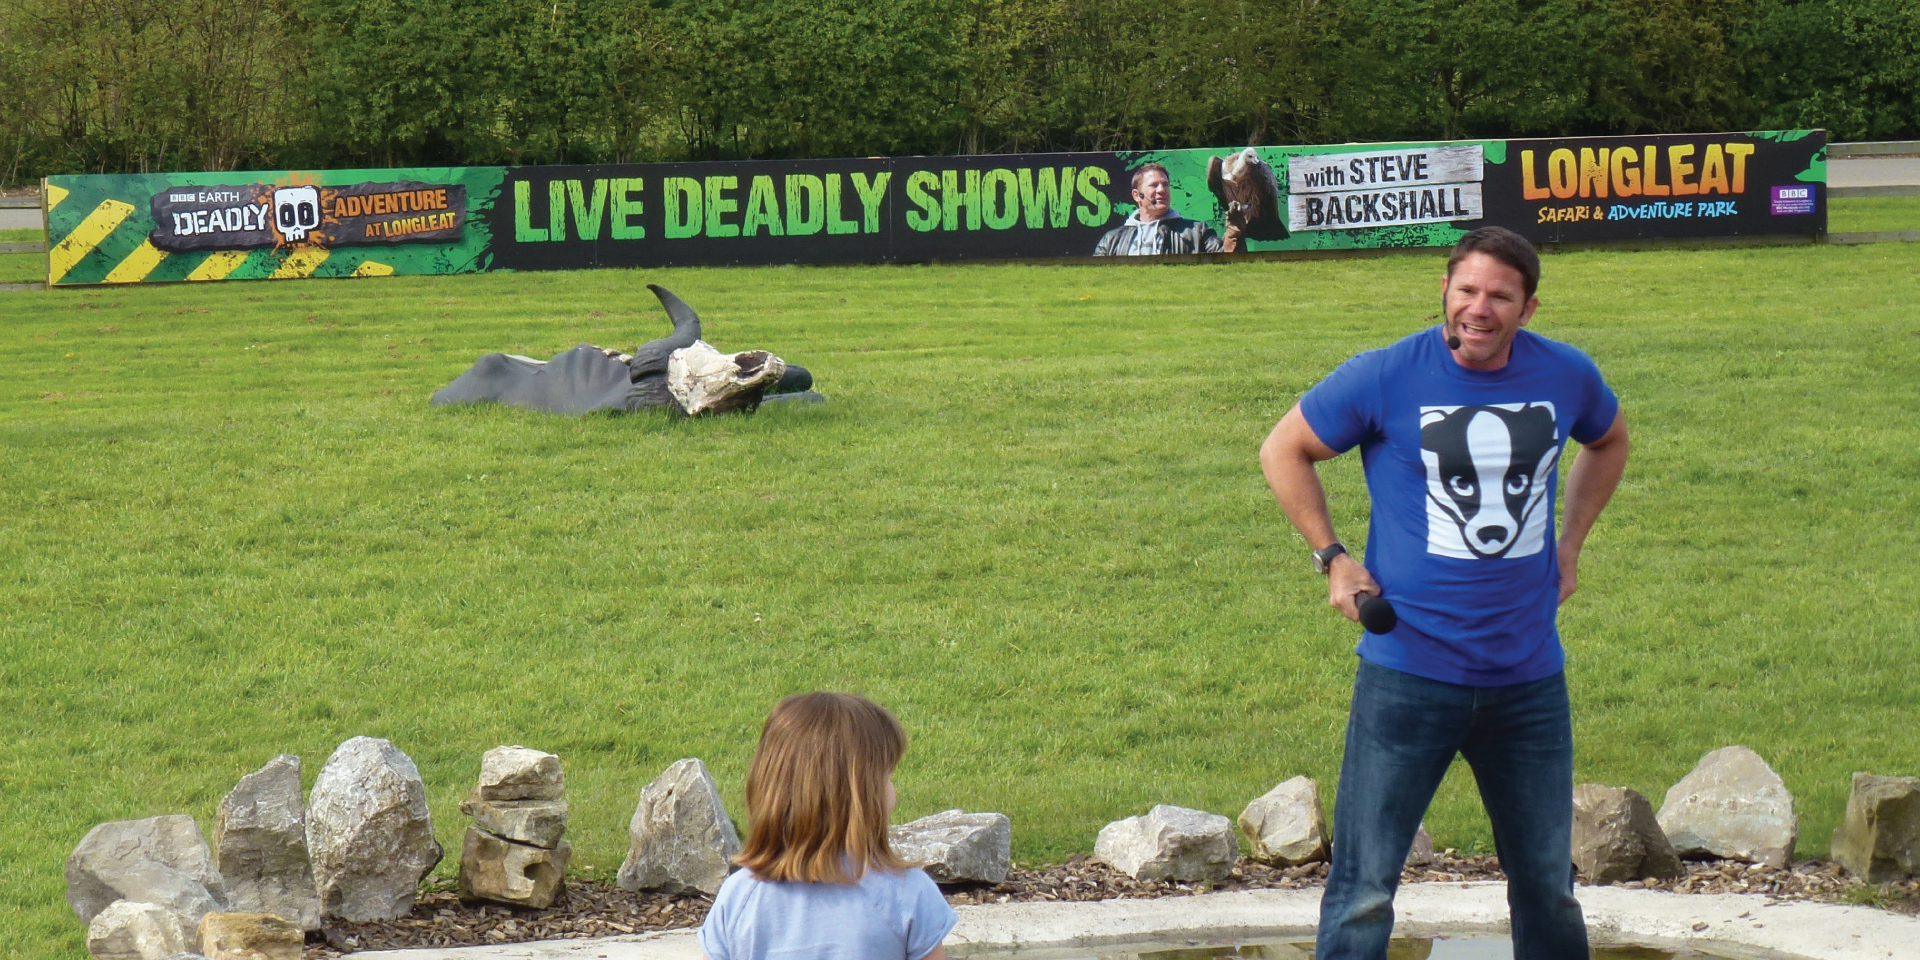 Deadly Adventure at Longleat Live Deadly Shows